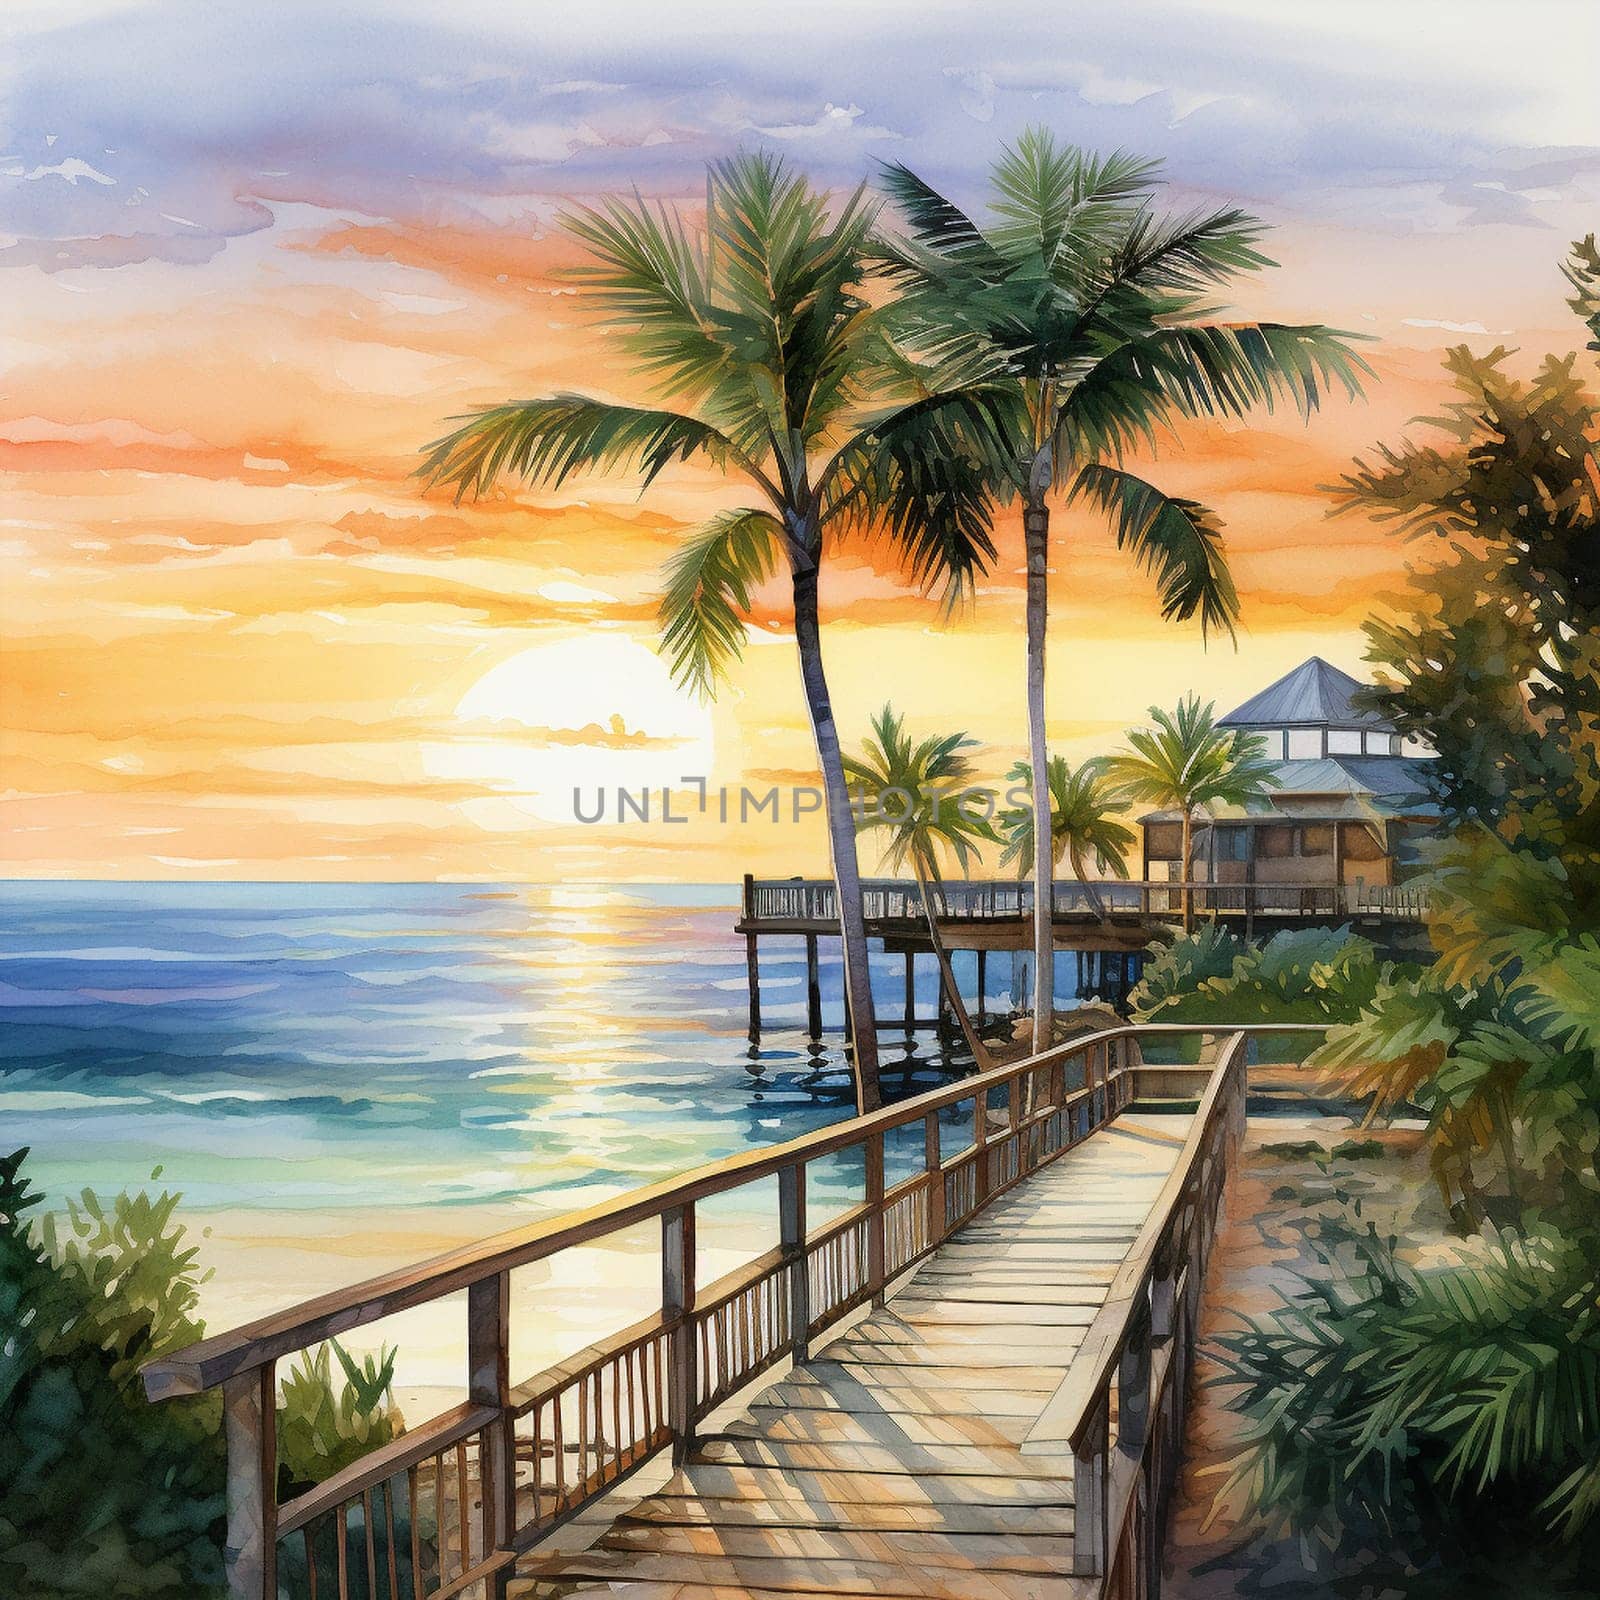 Immerse yourself in the serene beauty of nature with this traditional watercolor painting. 'Azure Reflections' captures the essence of a coastal scene at sunset, where the ocean mirrors the breathtaking colors of the sky. The calm waves rhythmically lap against the shore, creating a soothing atmosphere. A picturesque beach with soft, golden sands is surrounded by lush green foliage and tall palm trees, inviting you to unwind and relax. In the distance, a small wooden dock extends into the water, emphasizing the tranquil environment. The sky is adorned with warm hues of orange, pink, and purple as the sun gracefully sets below the horizon, casting a shimmering reflection on the water's surface. A few seagulls soar above, completing the peaceful ambiance of this scene.